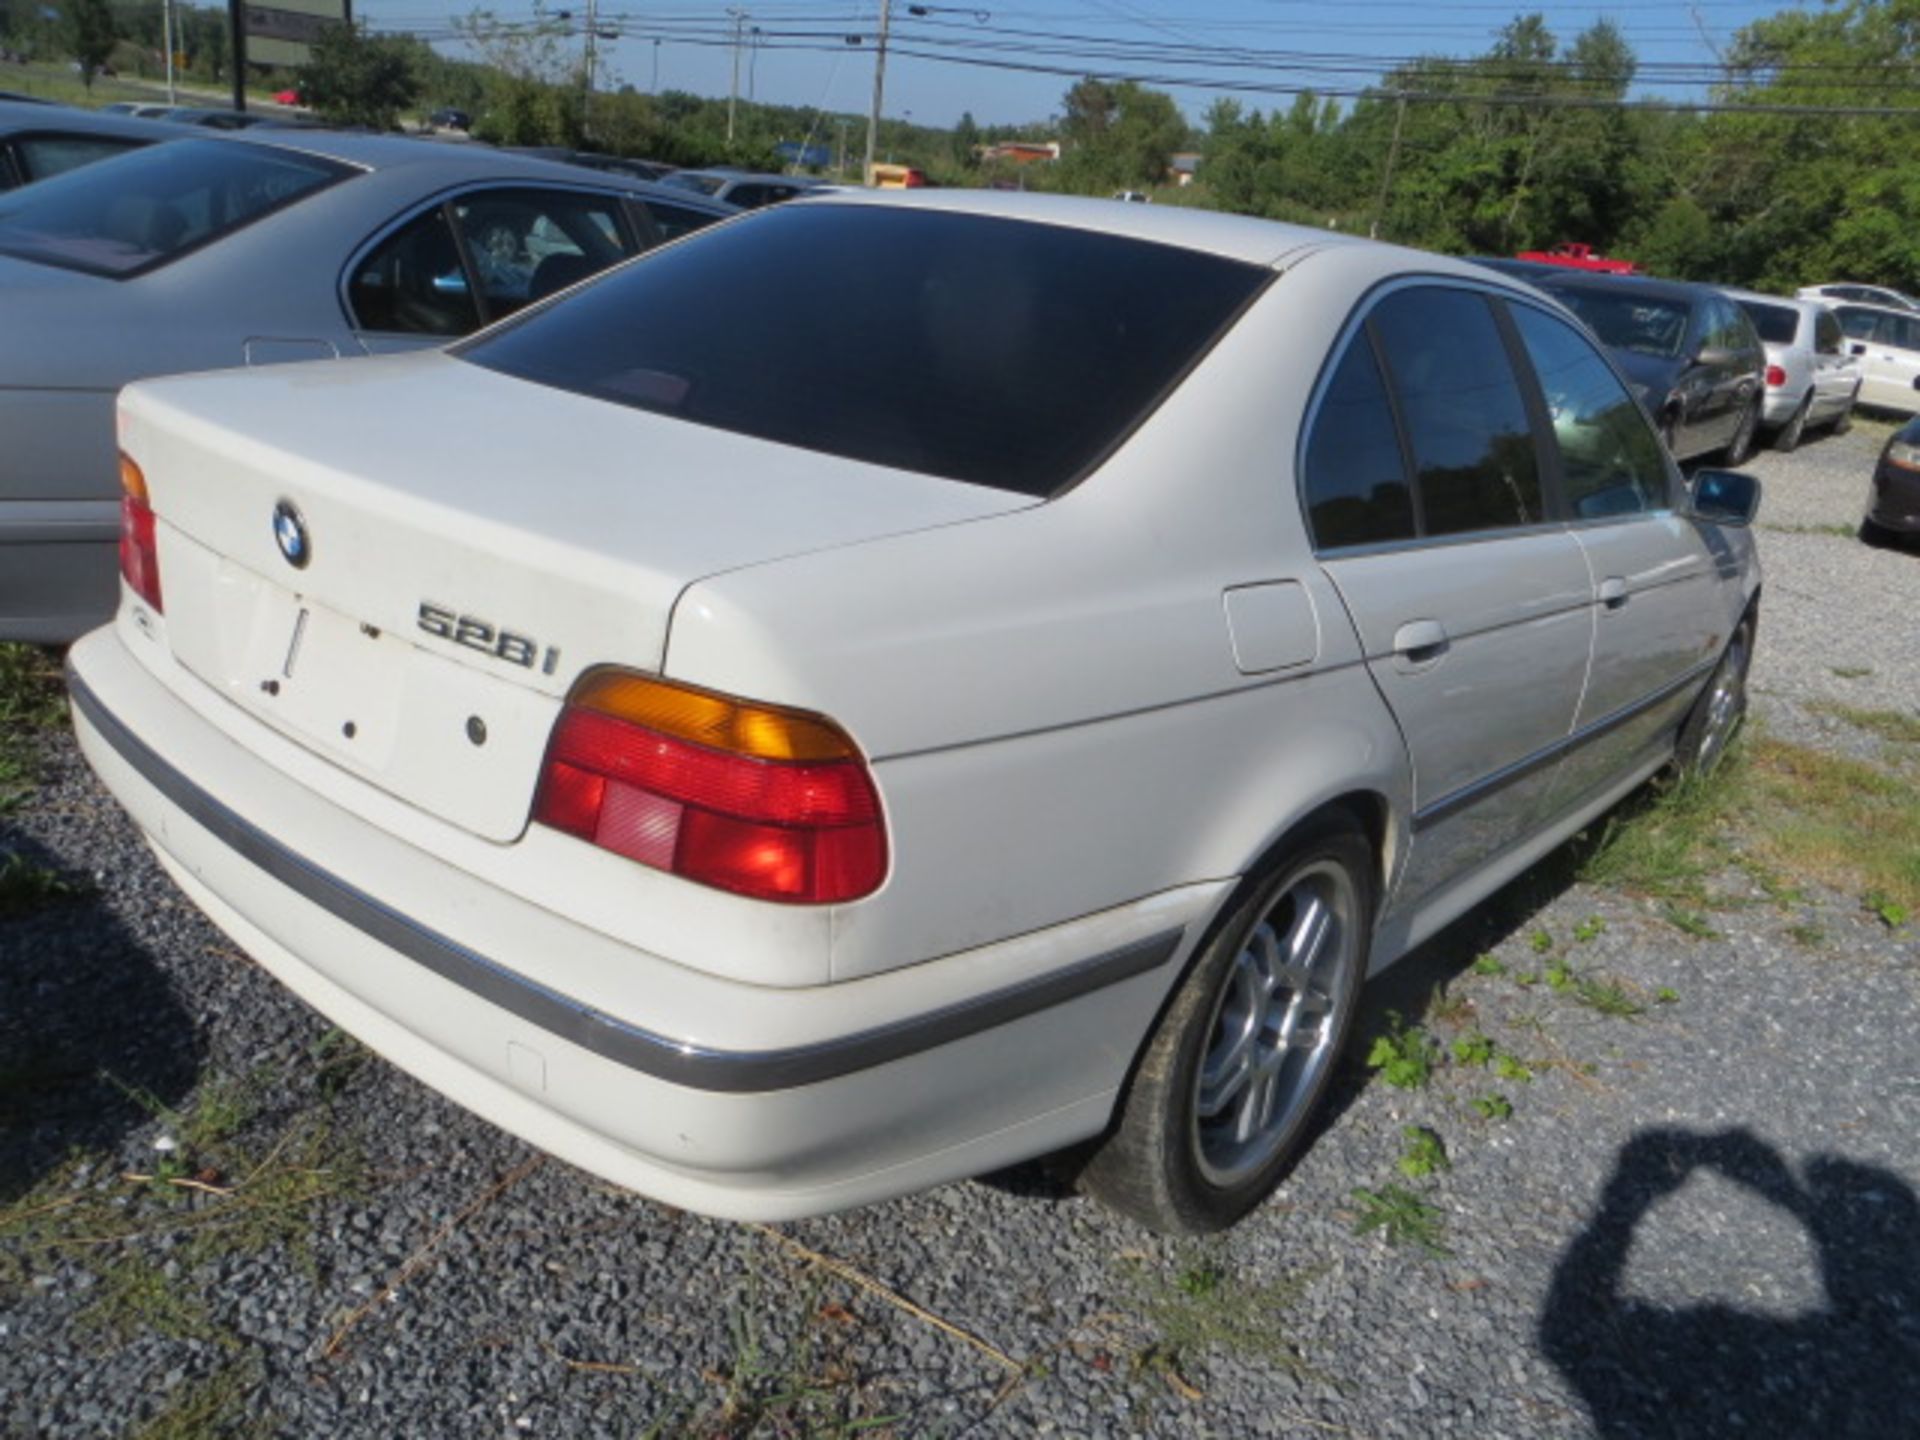 1999 BMW 528i-PAINT PEELING-BAD MIRROR 126000 MILES,VIN WBADM6343XBY34055, SOLD W/ GOOD TRANSFERABLE - Image 3 of 3